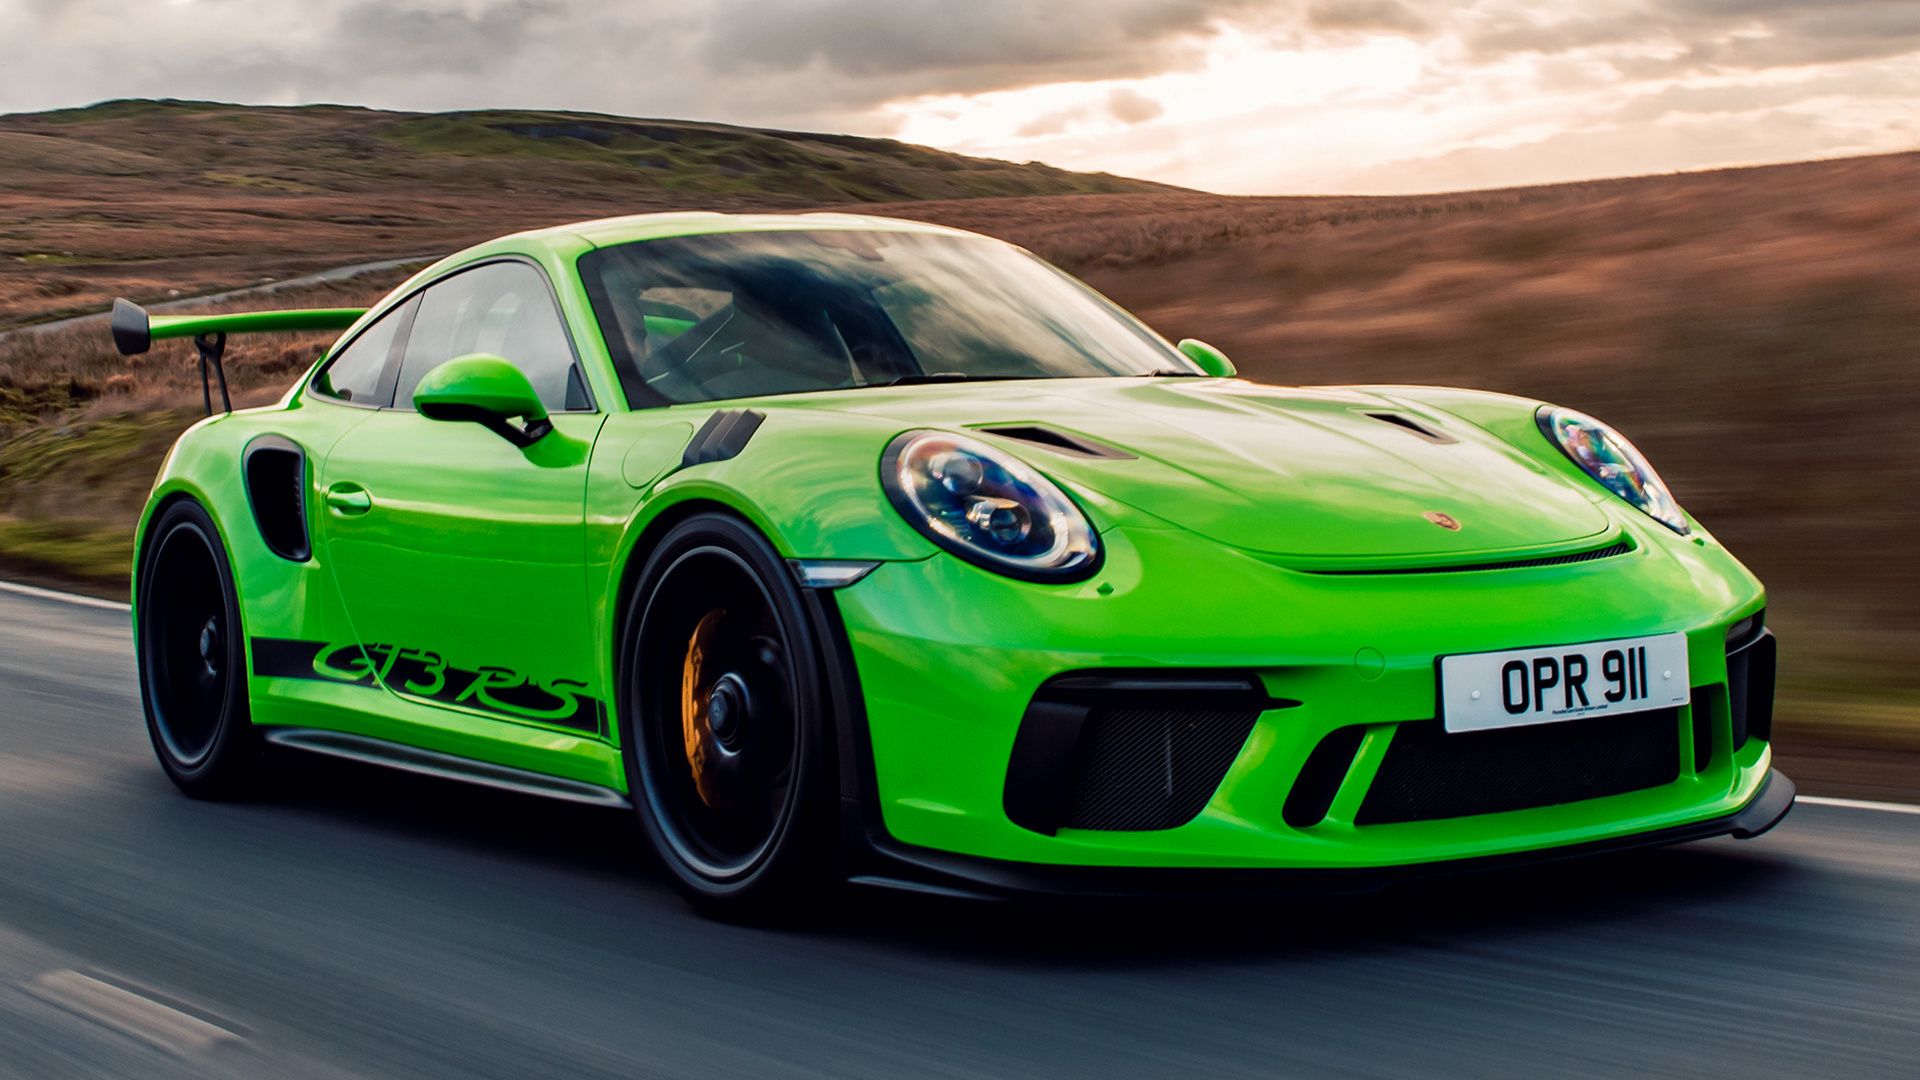 Porsche 911 GT3 RS (UK) and HD Image